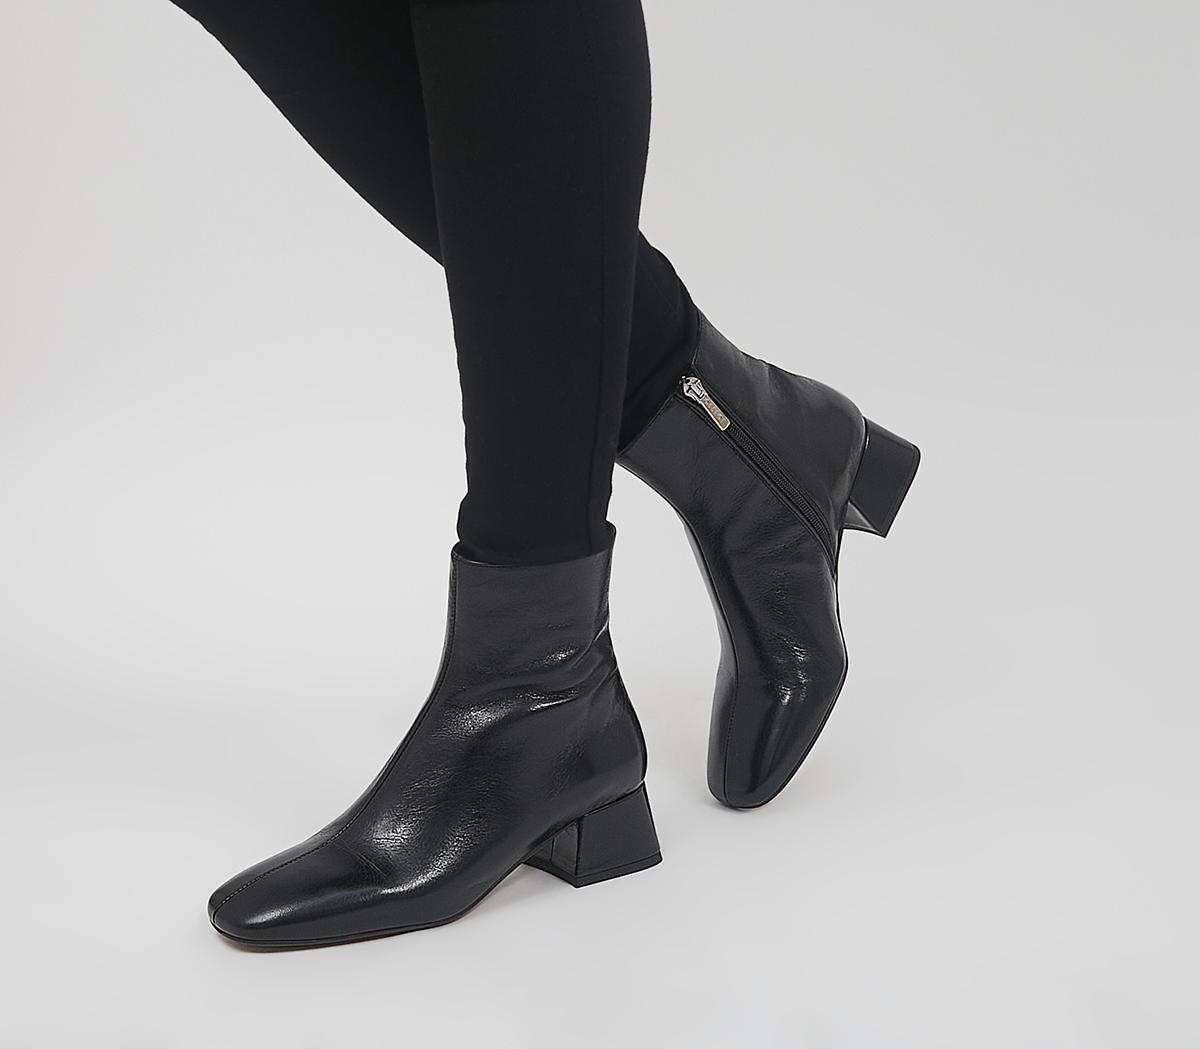 OFFICEApproval Low Square Toe BootsBlack Leather